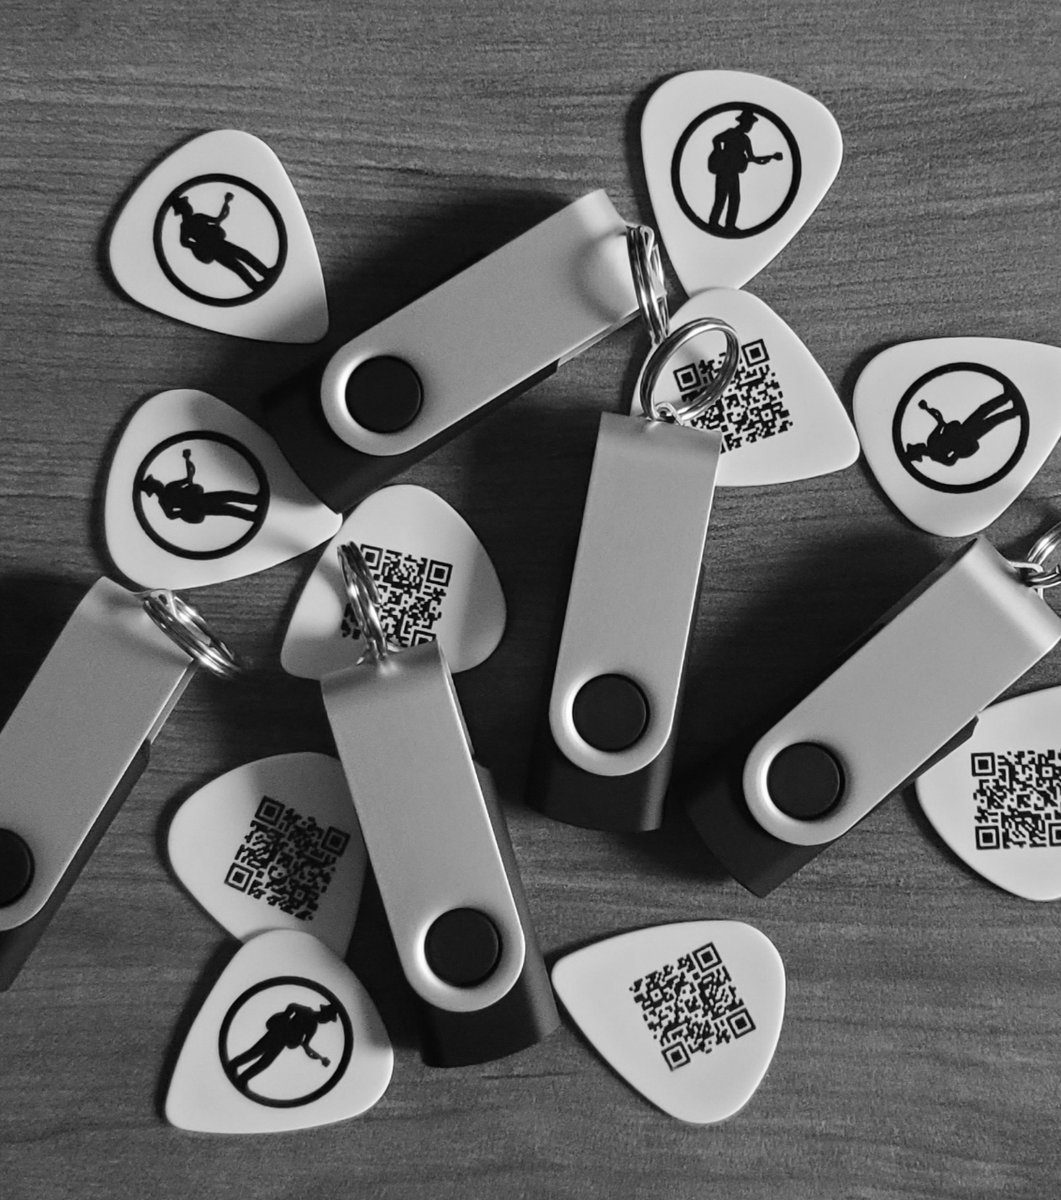 A new batch of flash / thumb drives in the works. I hope you're all having a great weekend. #deanjohanesen #circusswing #americanrootsmusic #cautionarytales #matonguitars #originalmusic #westernswing #hotclubjazz 
#swingonby